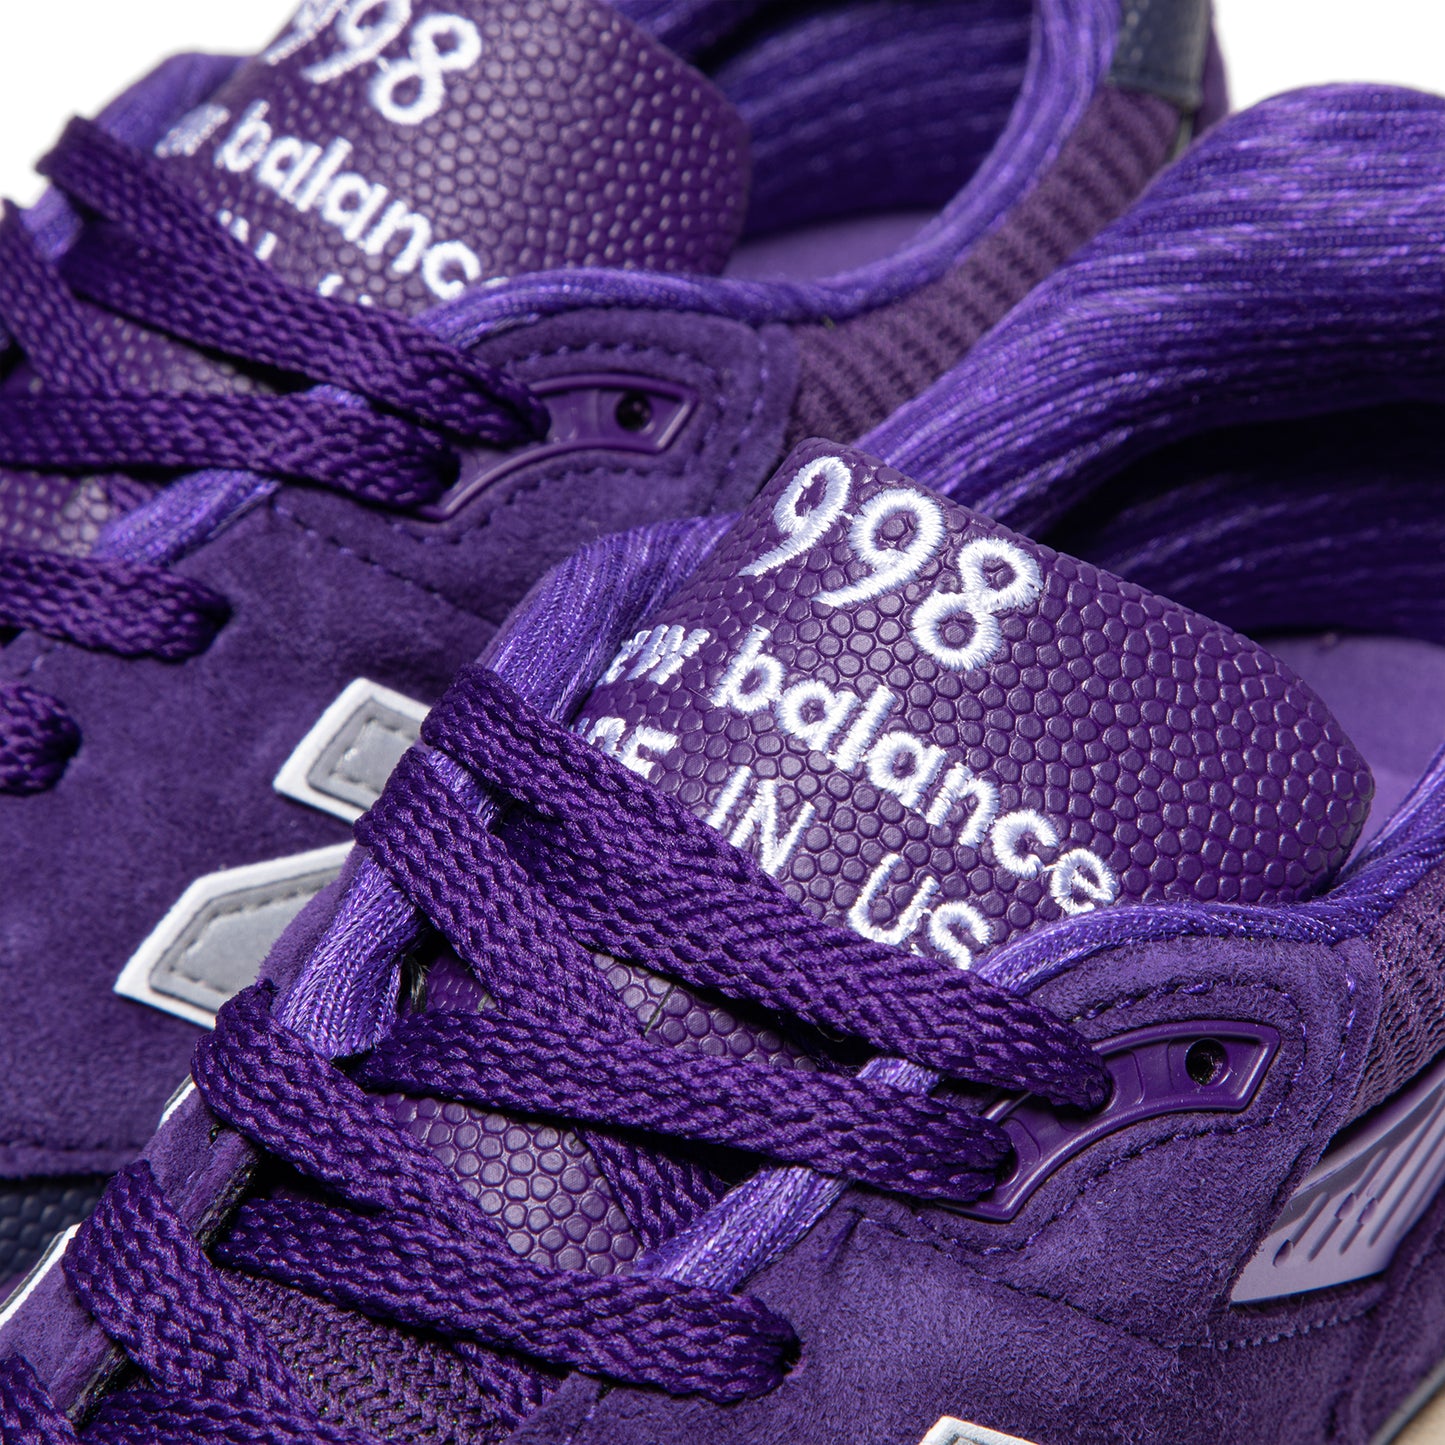 New Balance Made in USA 998 (Plum/Silver)